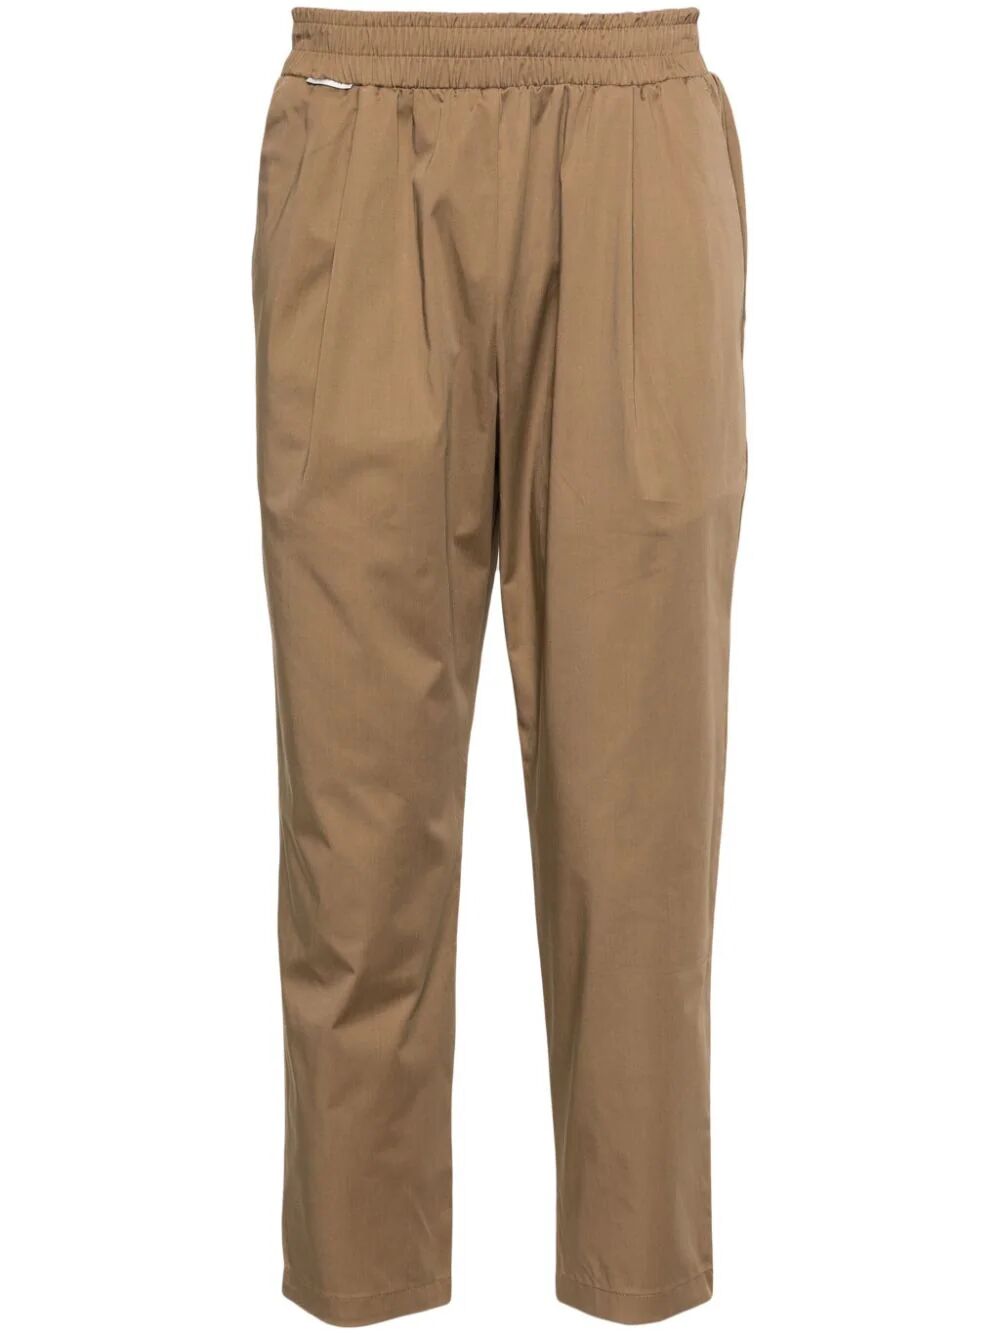 FAMILY FIRST CHINO PANTS,PS2405